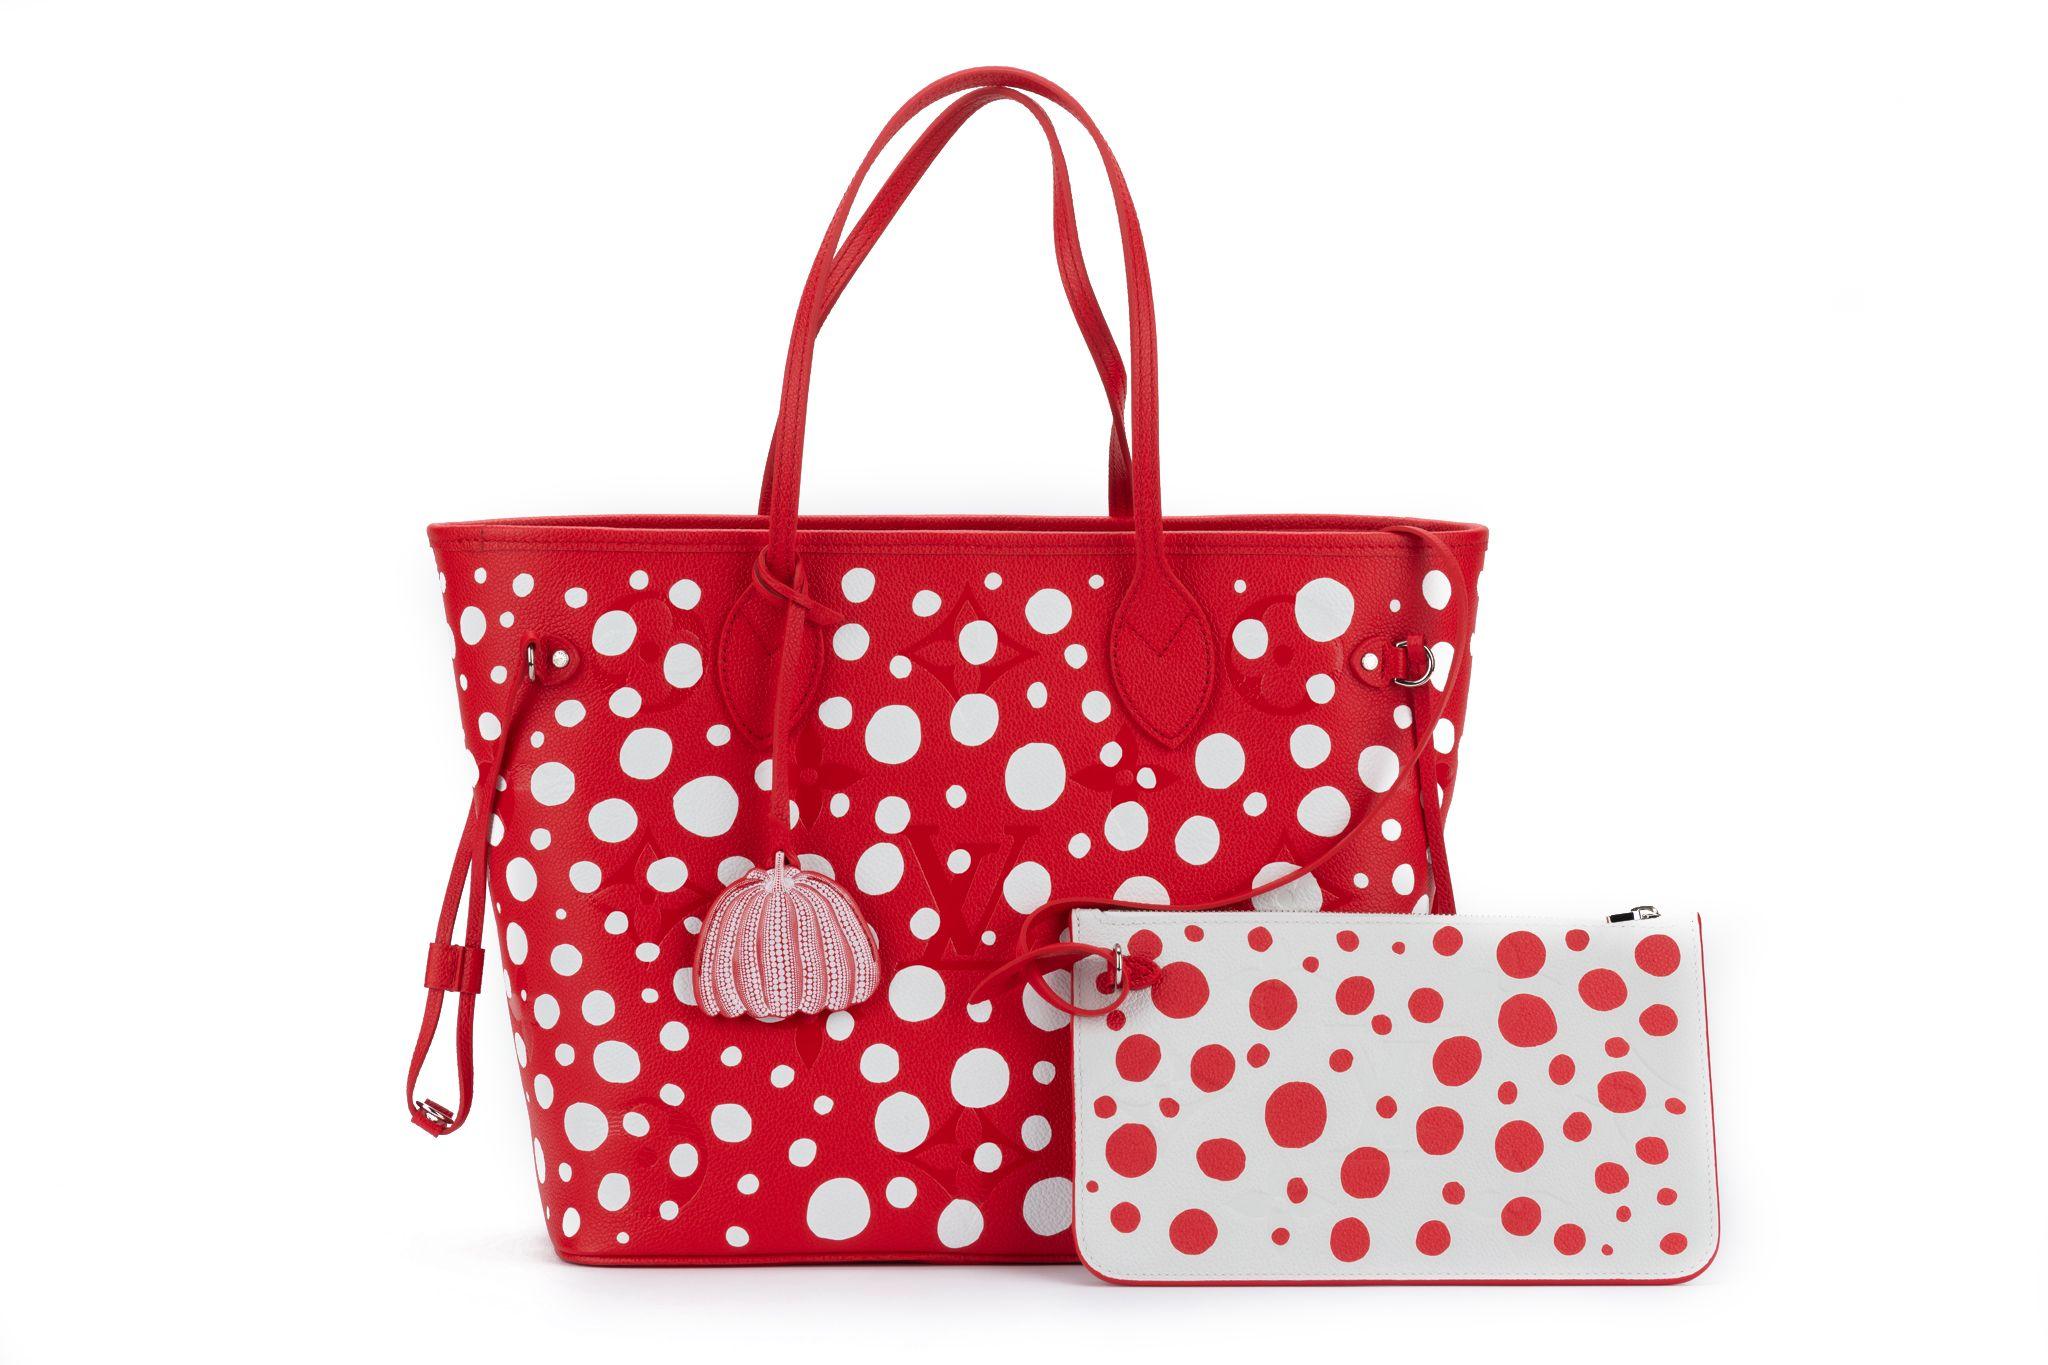 Louis Vuitton x Yayoi Kusama Neverfull in red and white. The bag features a galaxy of white dots on lustrous red Monogram Empreinte cowhide. Brand new and comes with the original dustcover and box.